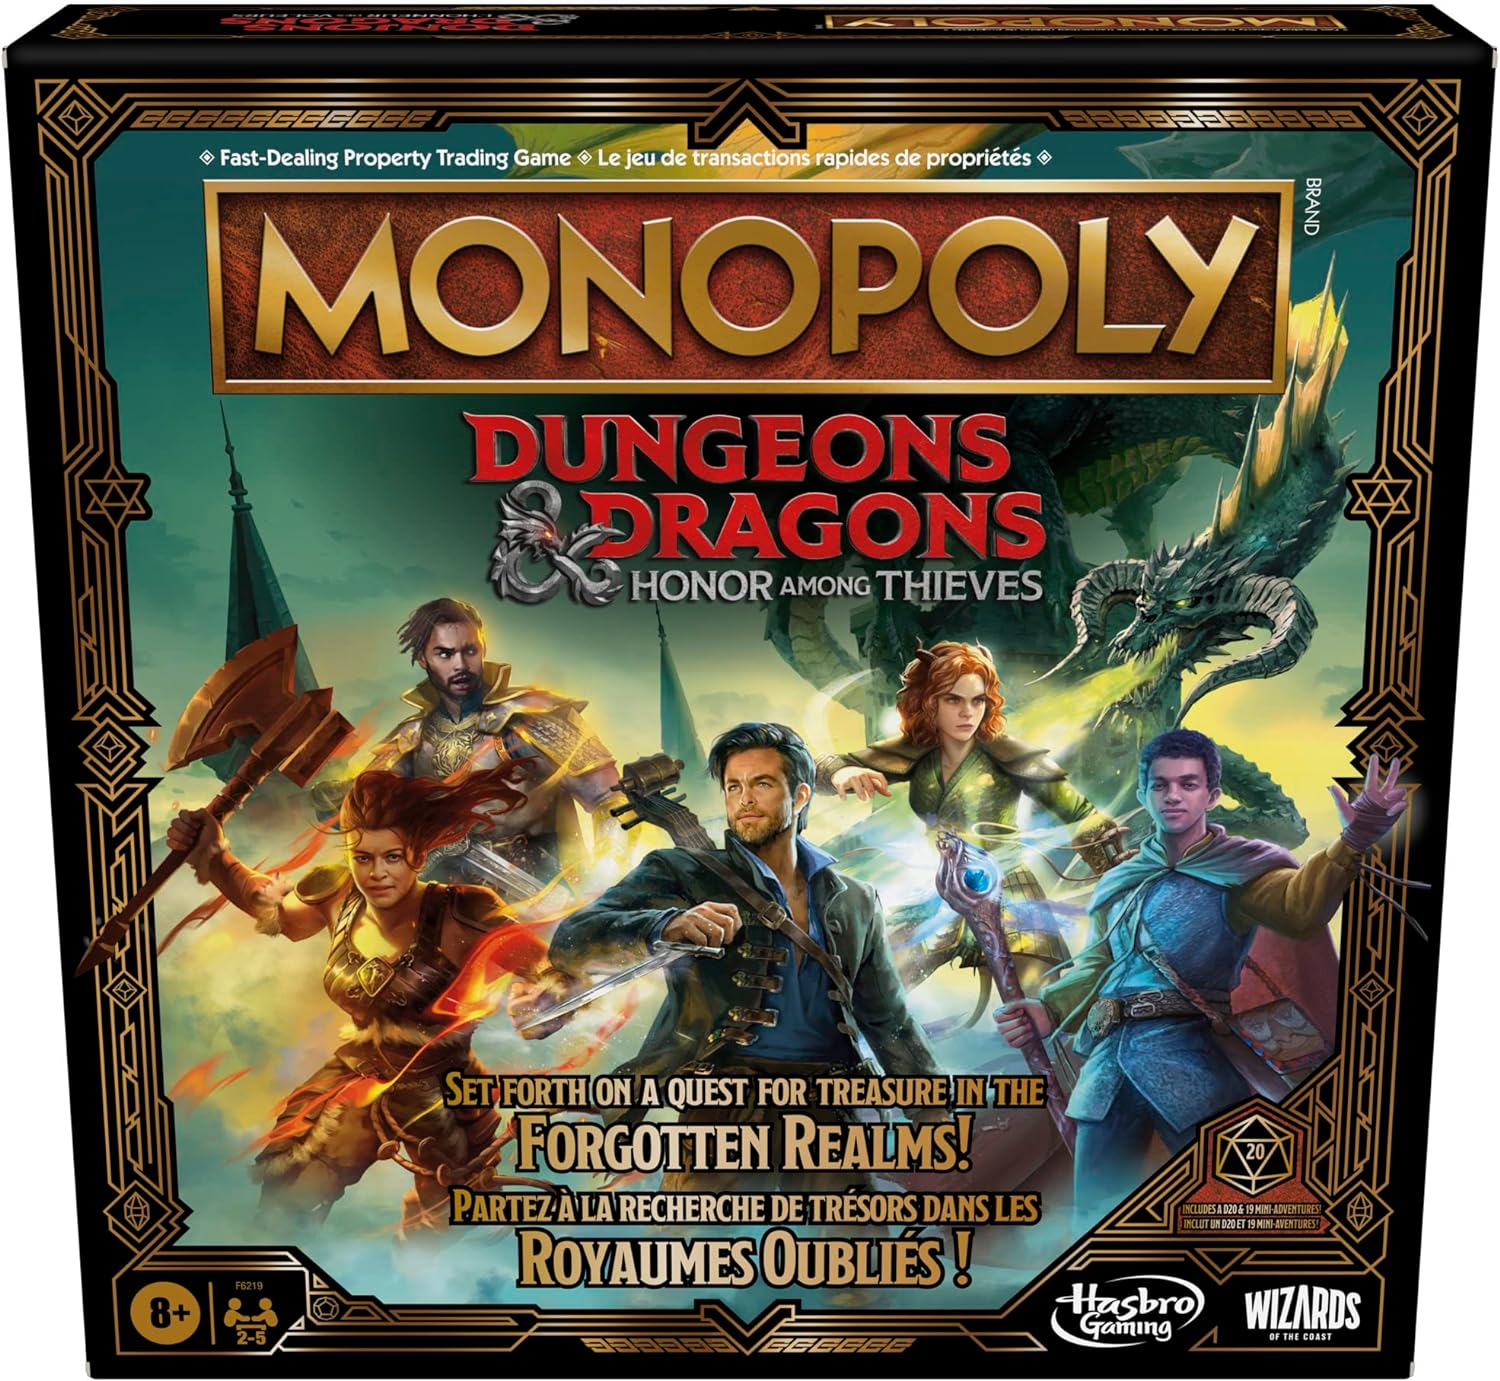 Monopoly Dungeons & Dragons&colon; Honor Among Thieves Game&comma; Inspired By The D&d Movie&comma; Monopoly D&d Board Game For 2-5 Players&comma; Ages 8 And Up &lpar;english & French&rpar;